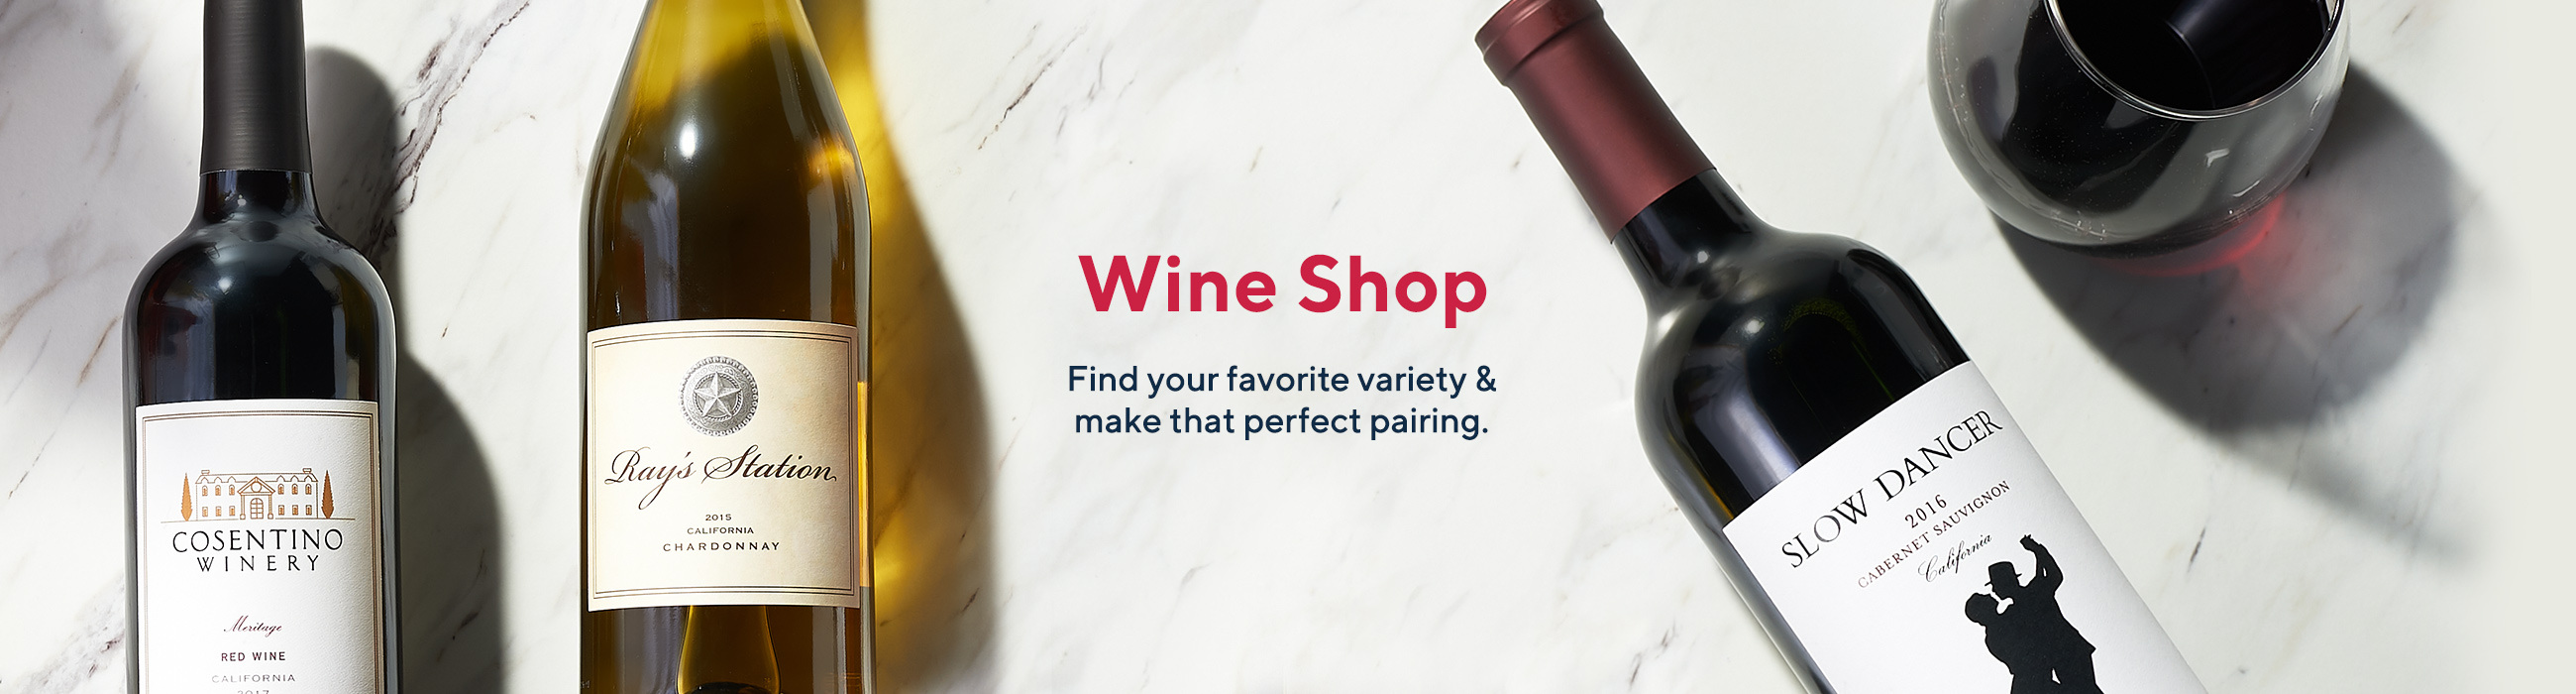 Wine Shop   Find your favorite variety and make that perfect pairing. 